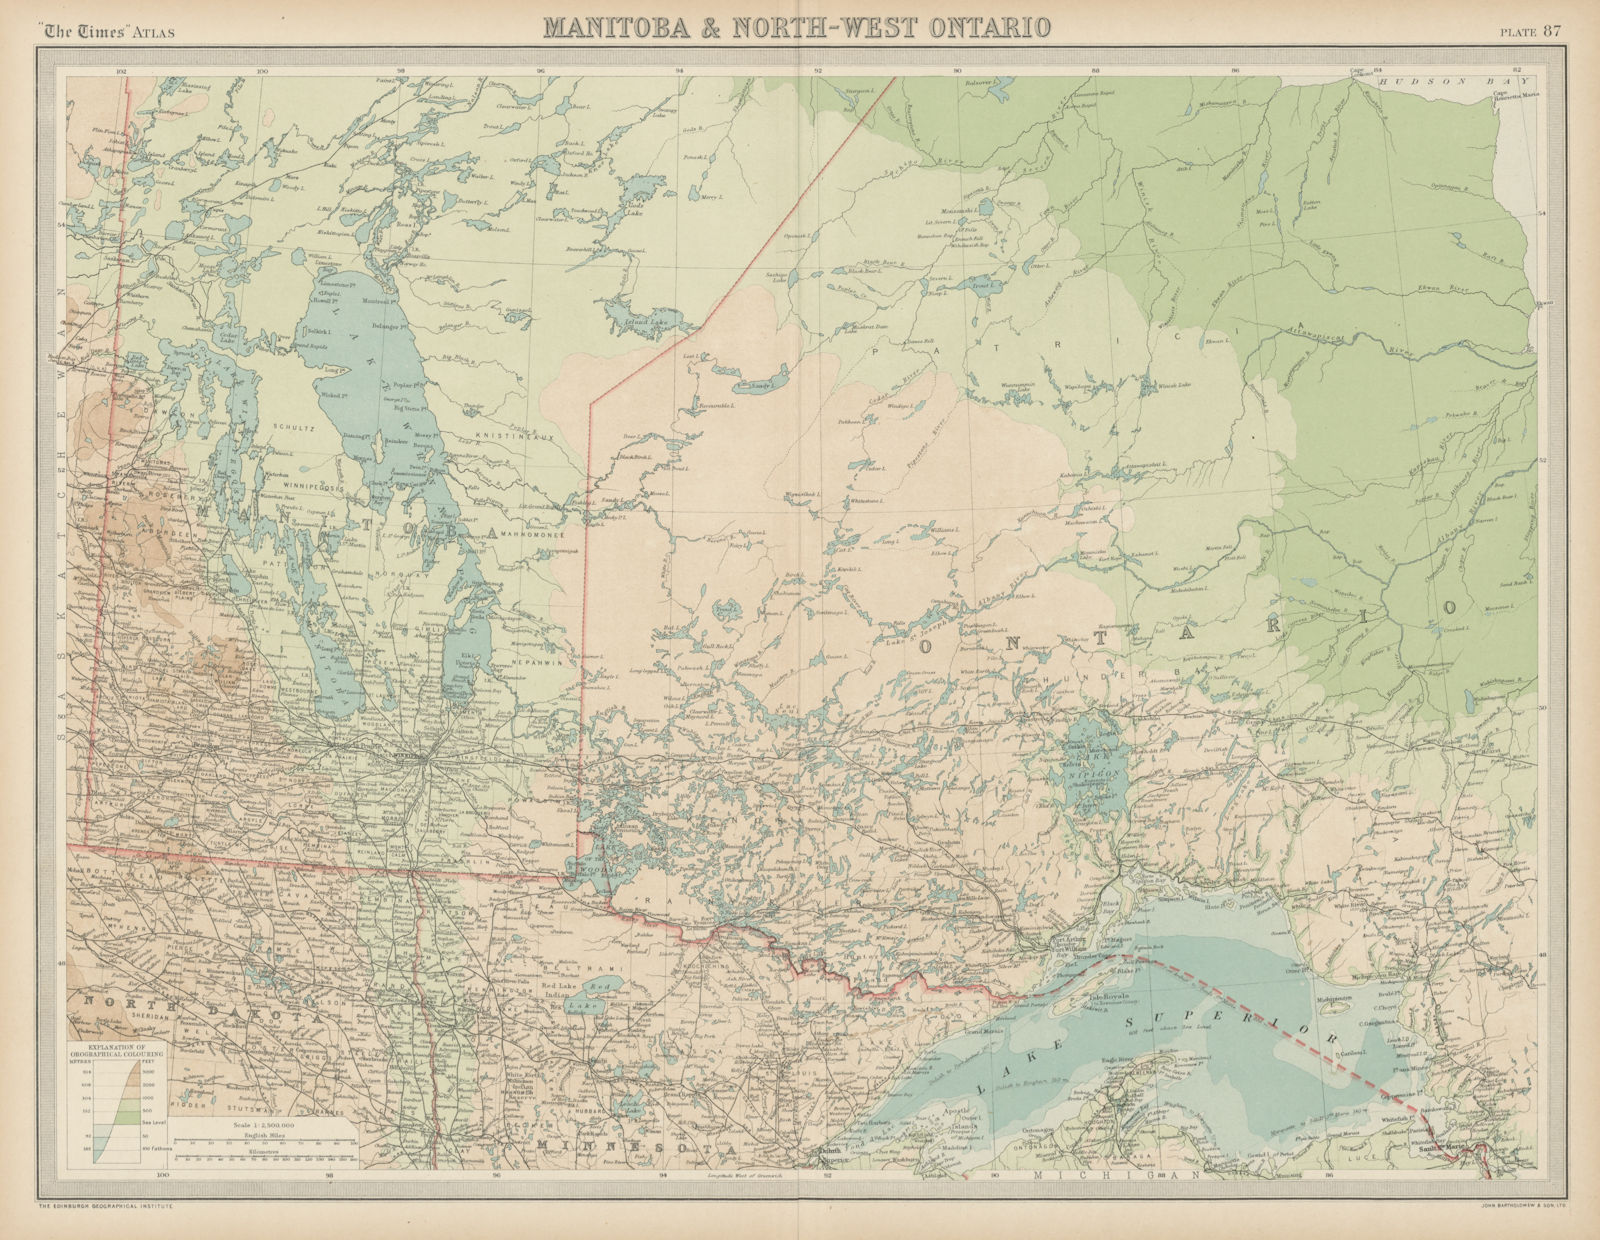 Associate Product Manitoba & North-west Ontario. Canada. THE TIMES 1922 old vintage map chart